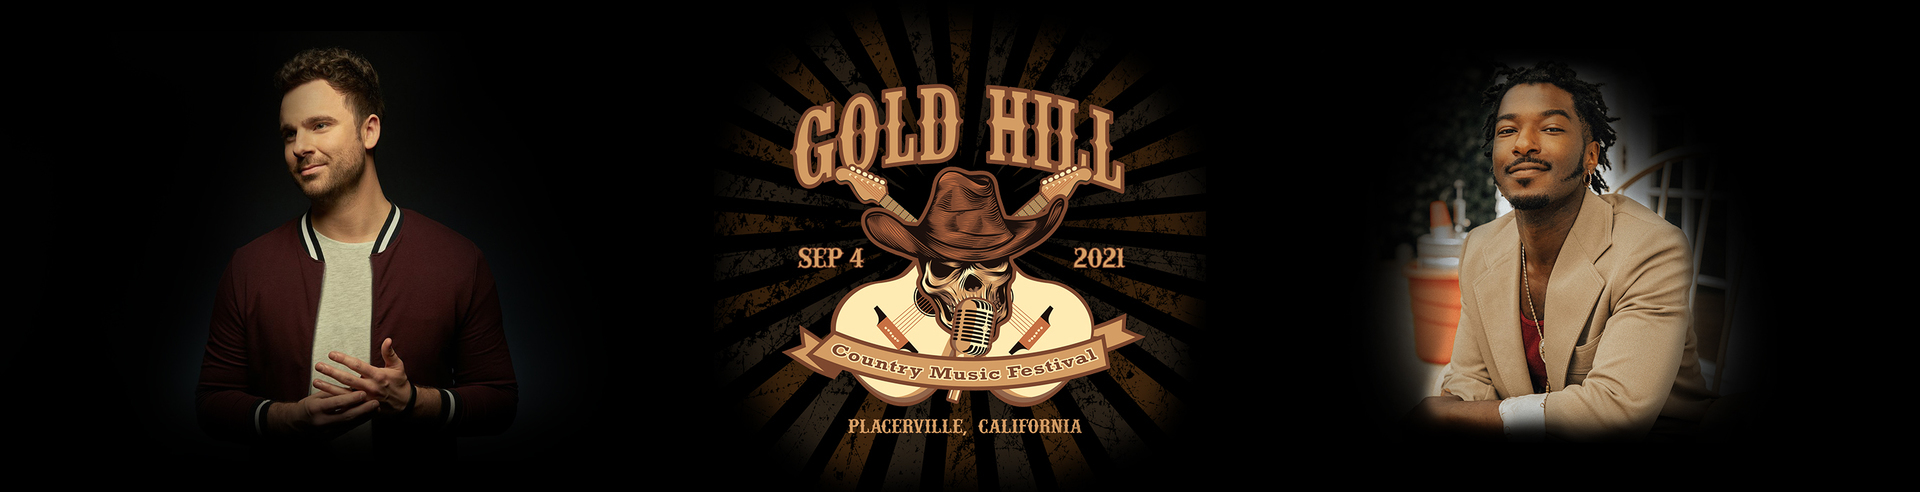 Gold Hill Country Music Festival, Placerville, California, United States